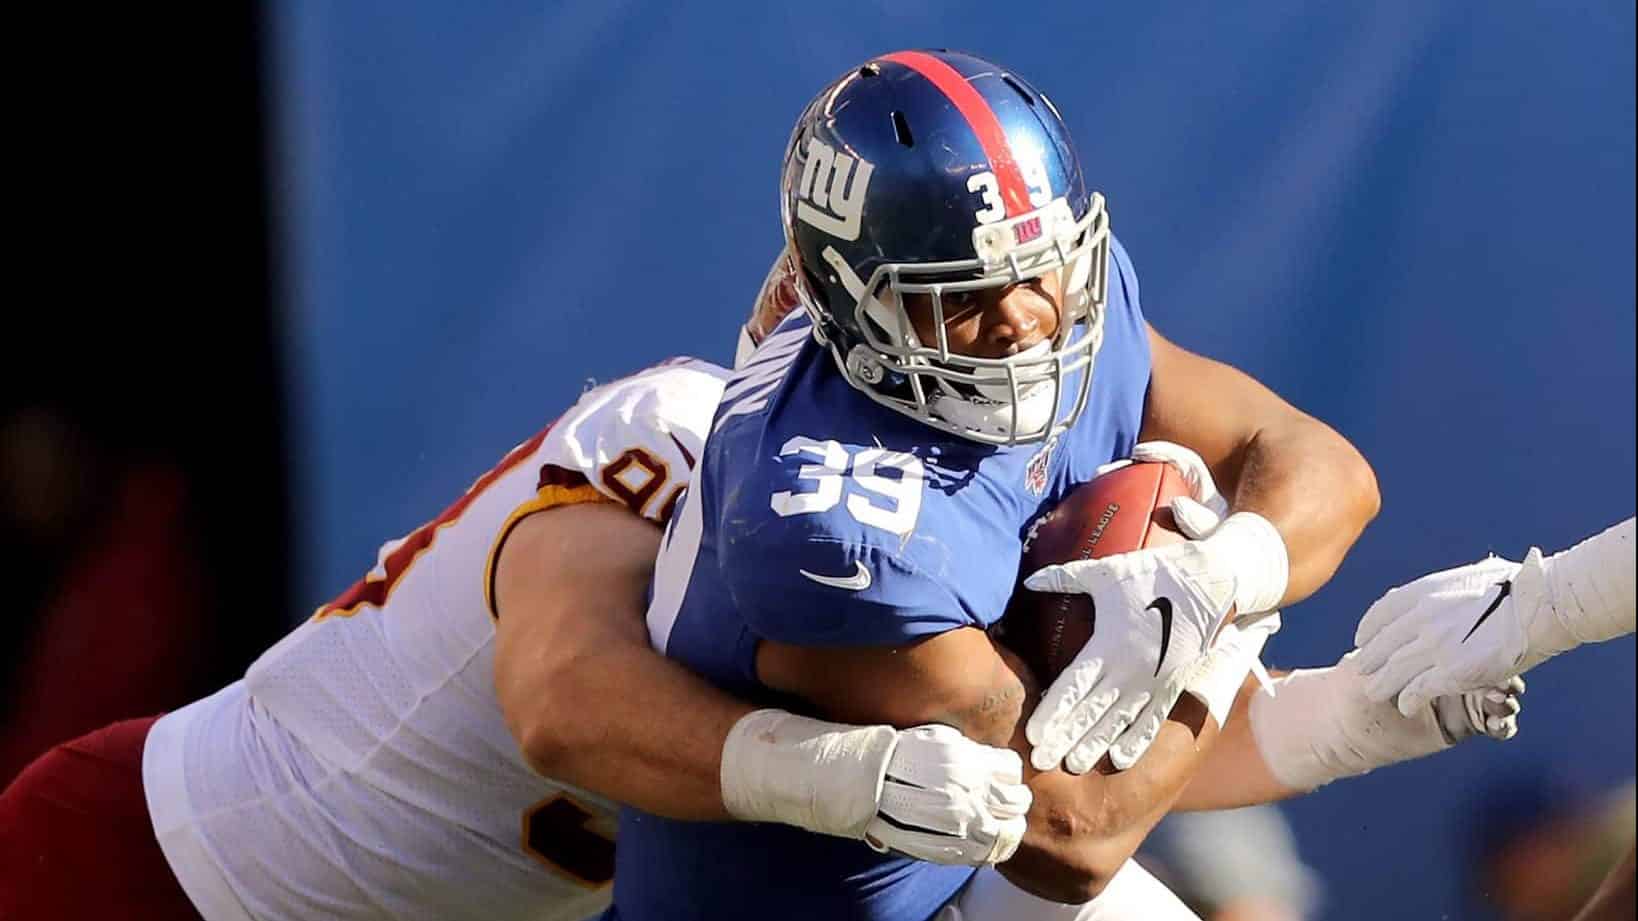 EAST RUTHERFORD, NEW JERSEY - SEPTEMBER 29: Elijhaa Penny #39 of the New York Giants carries the ball as Matthew Ioannidis #98 of the Washington Redskins defends in the fourth quarter at MetLife Stadium on September 29, 2019 in East Rutherford, New Jersey.